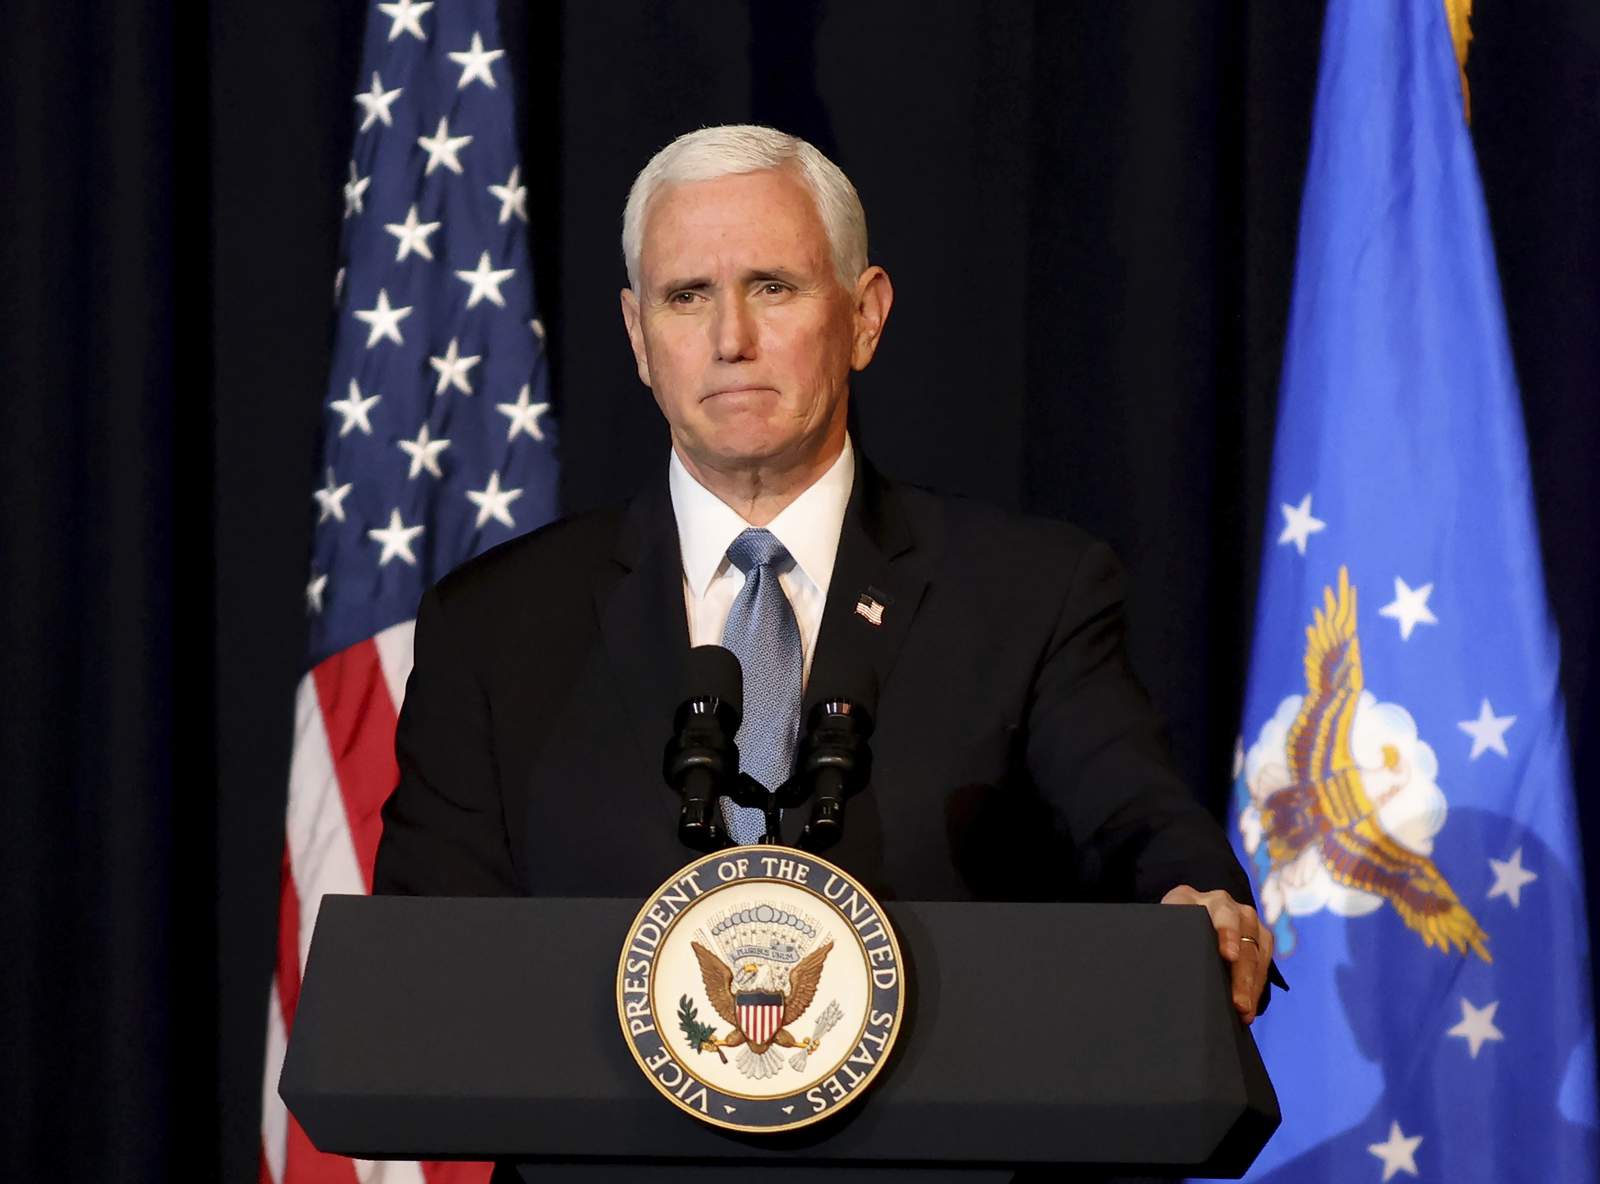 Former VP Mike Pence undergoes surgery to implant pacemaker